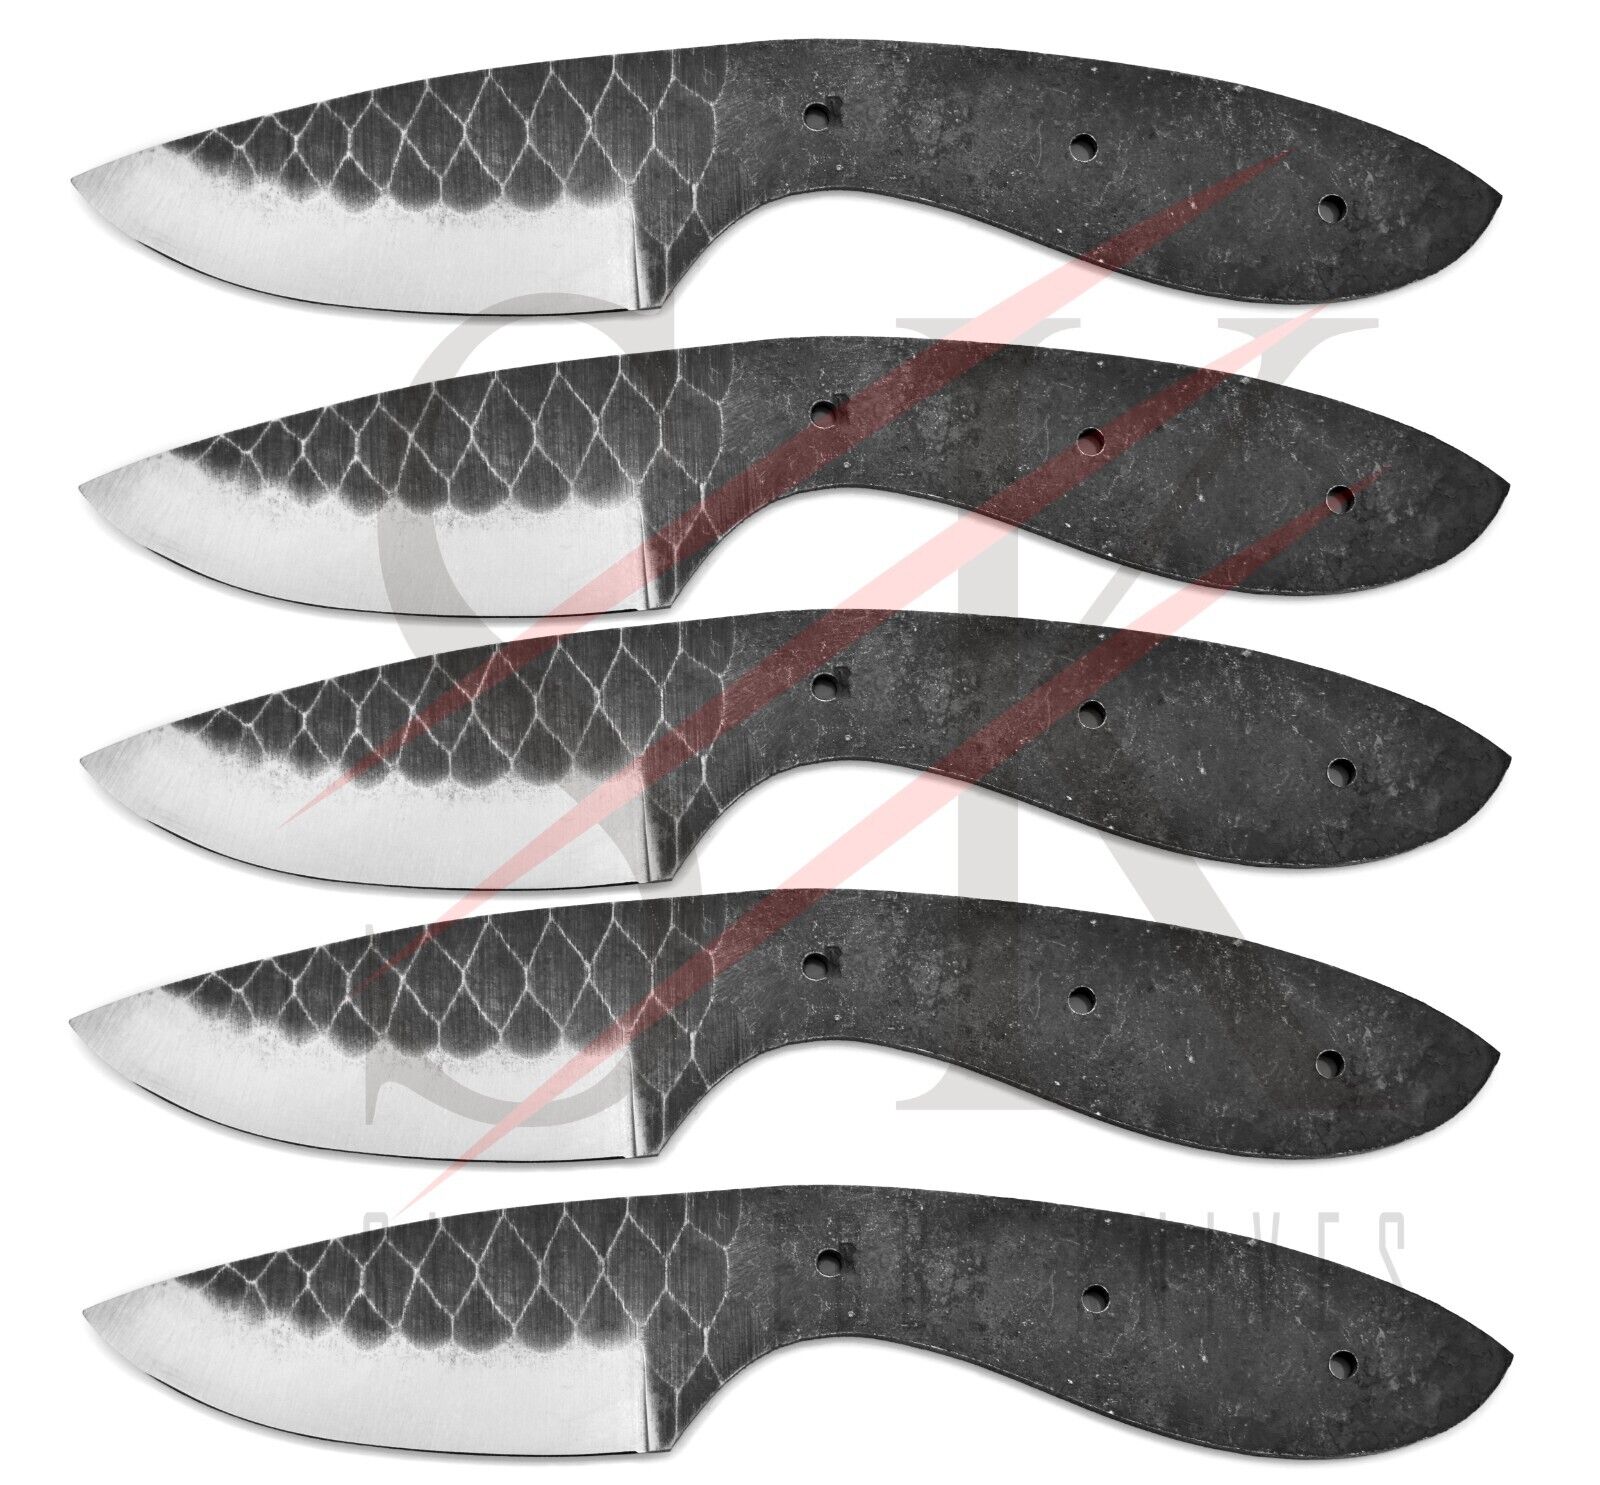 Lot of 5 Handmade High Carbon Steel Knife Blank Blade For Knives Making - BBL269